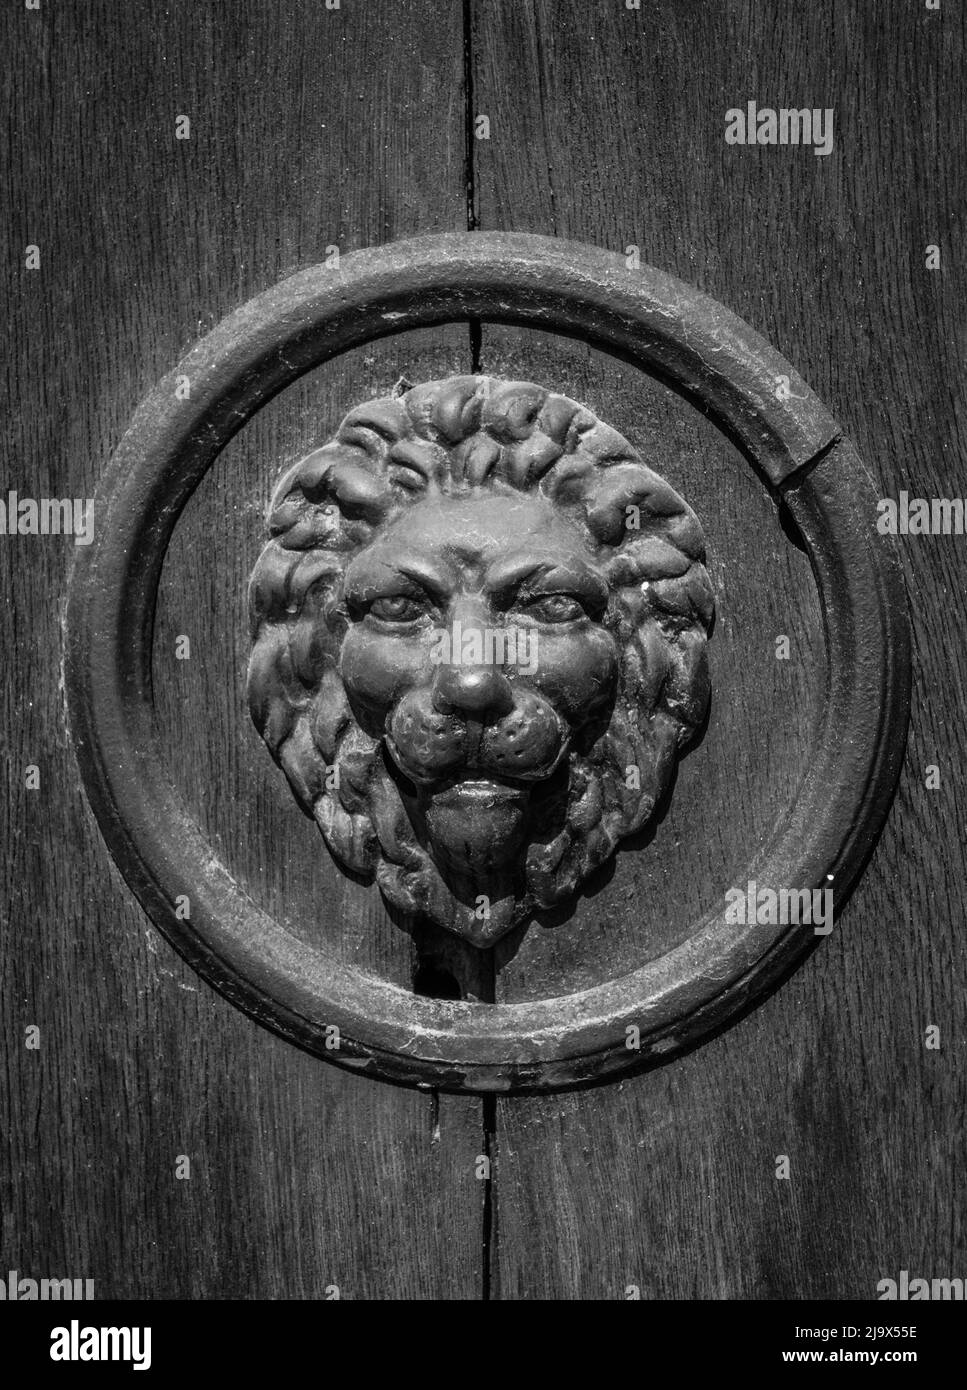 lion head on the door, black and white. Stock Photo